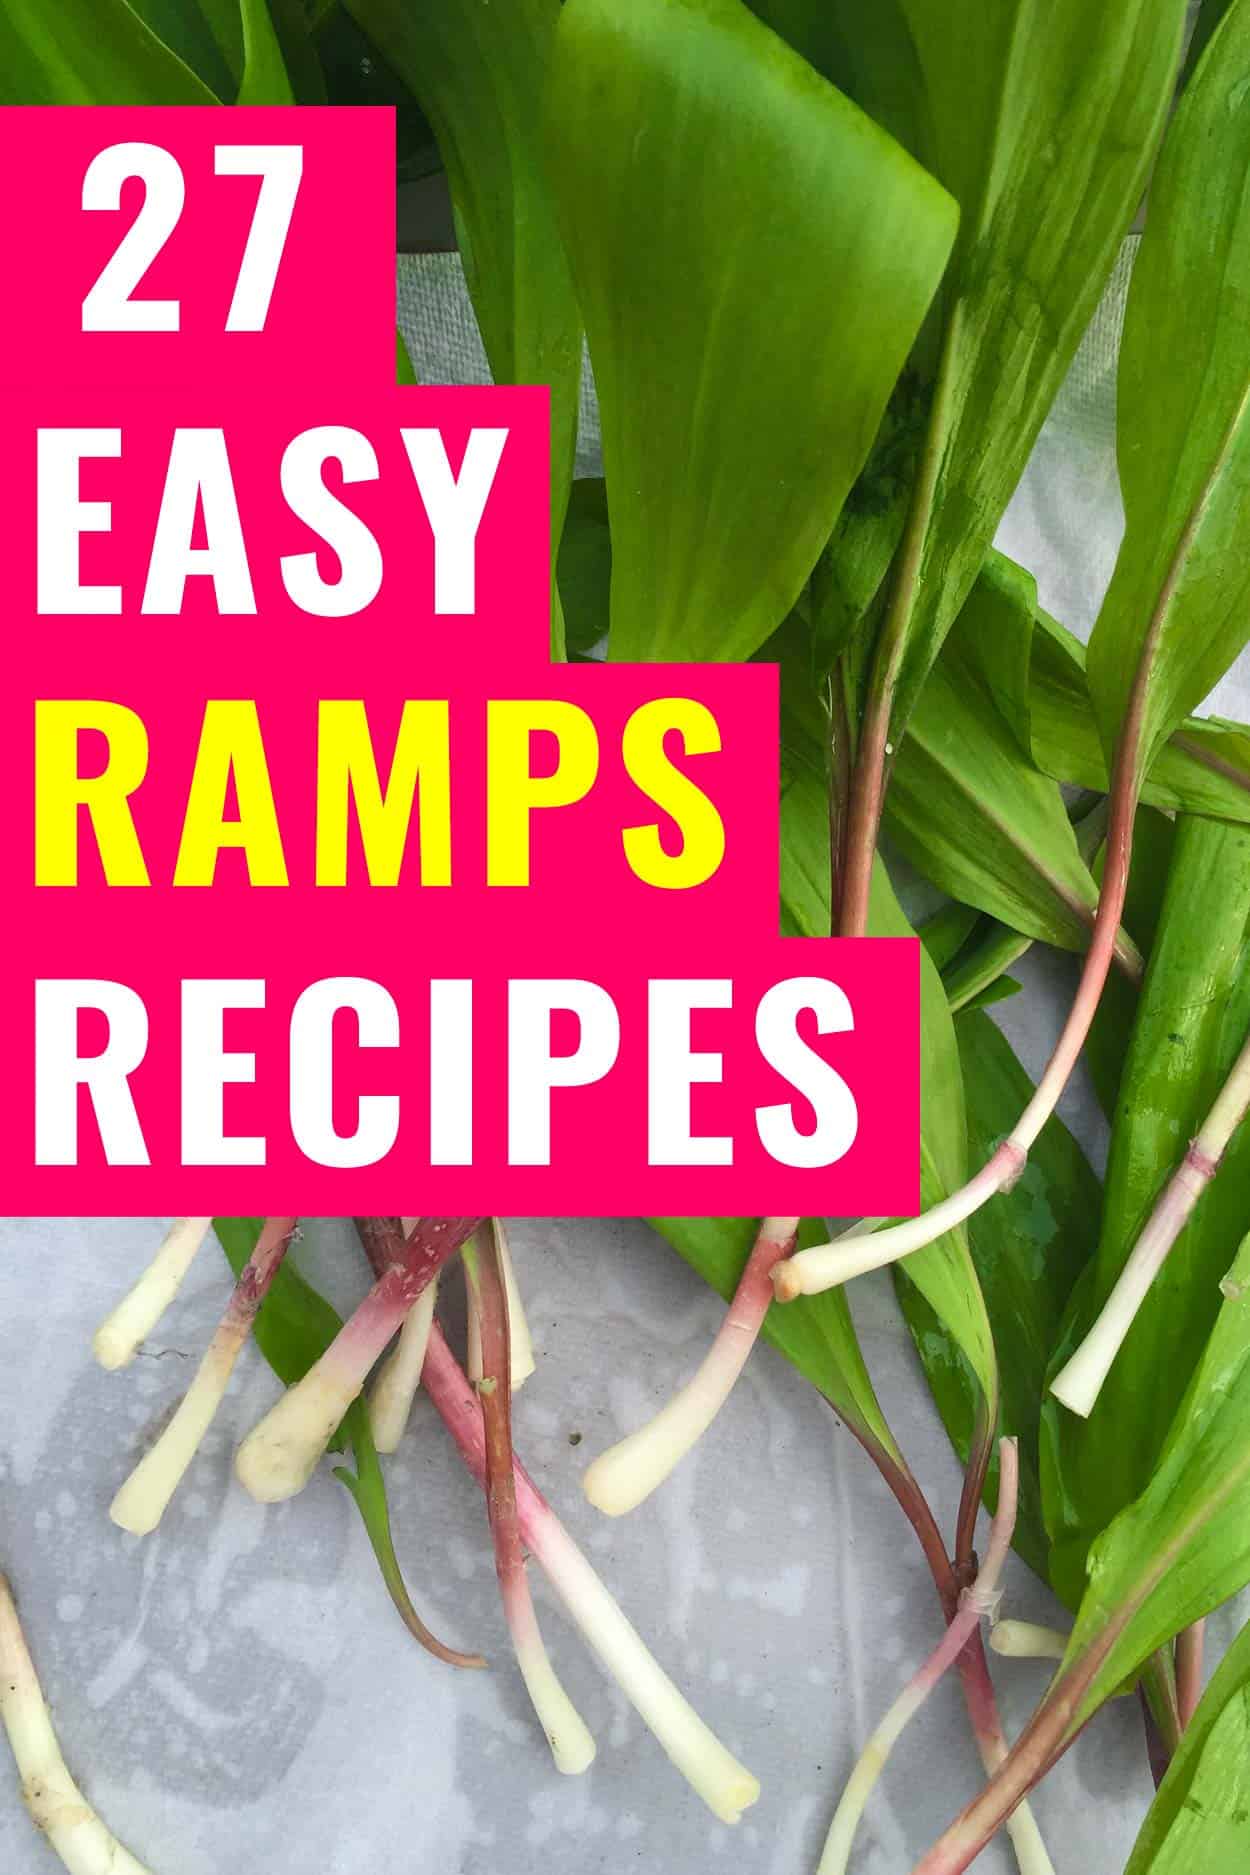 Cleaned ramps with text 27 Easy Ramps Recipes